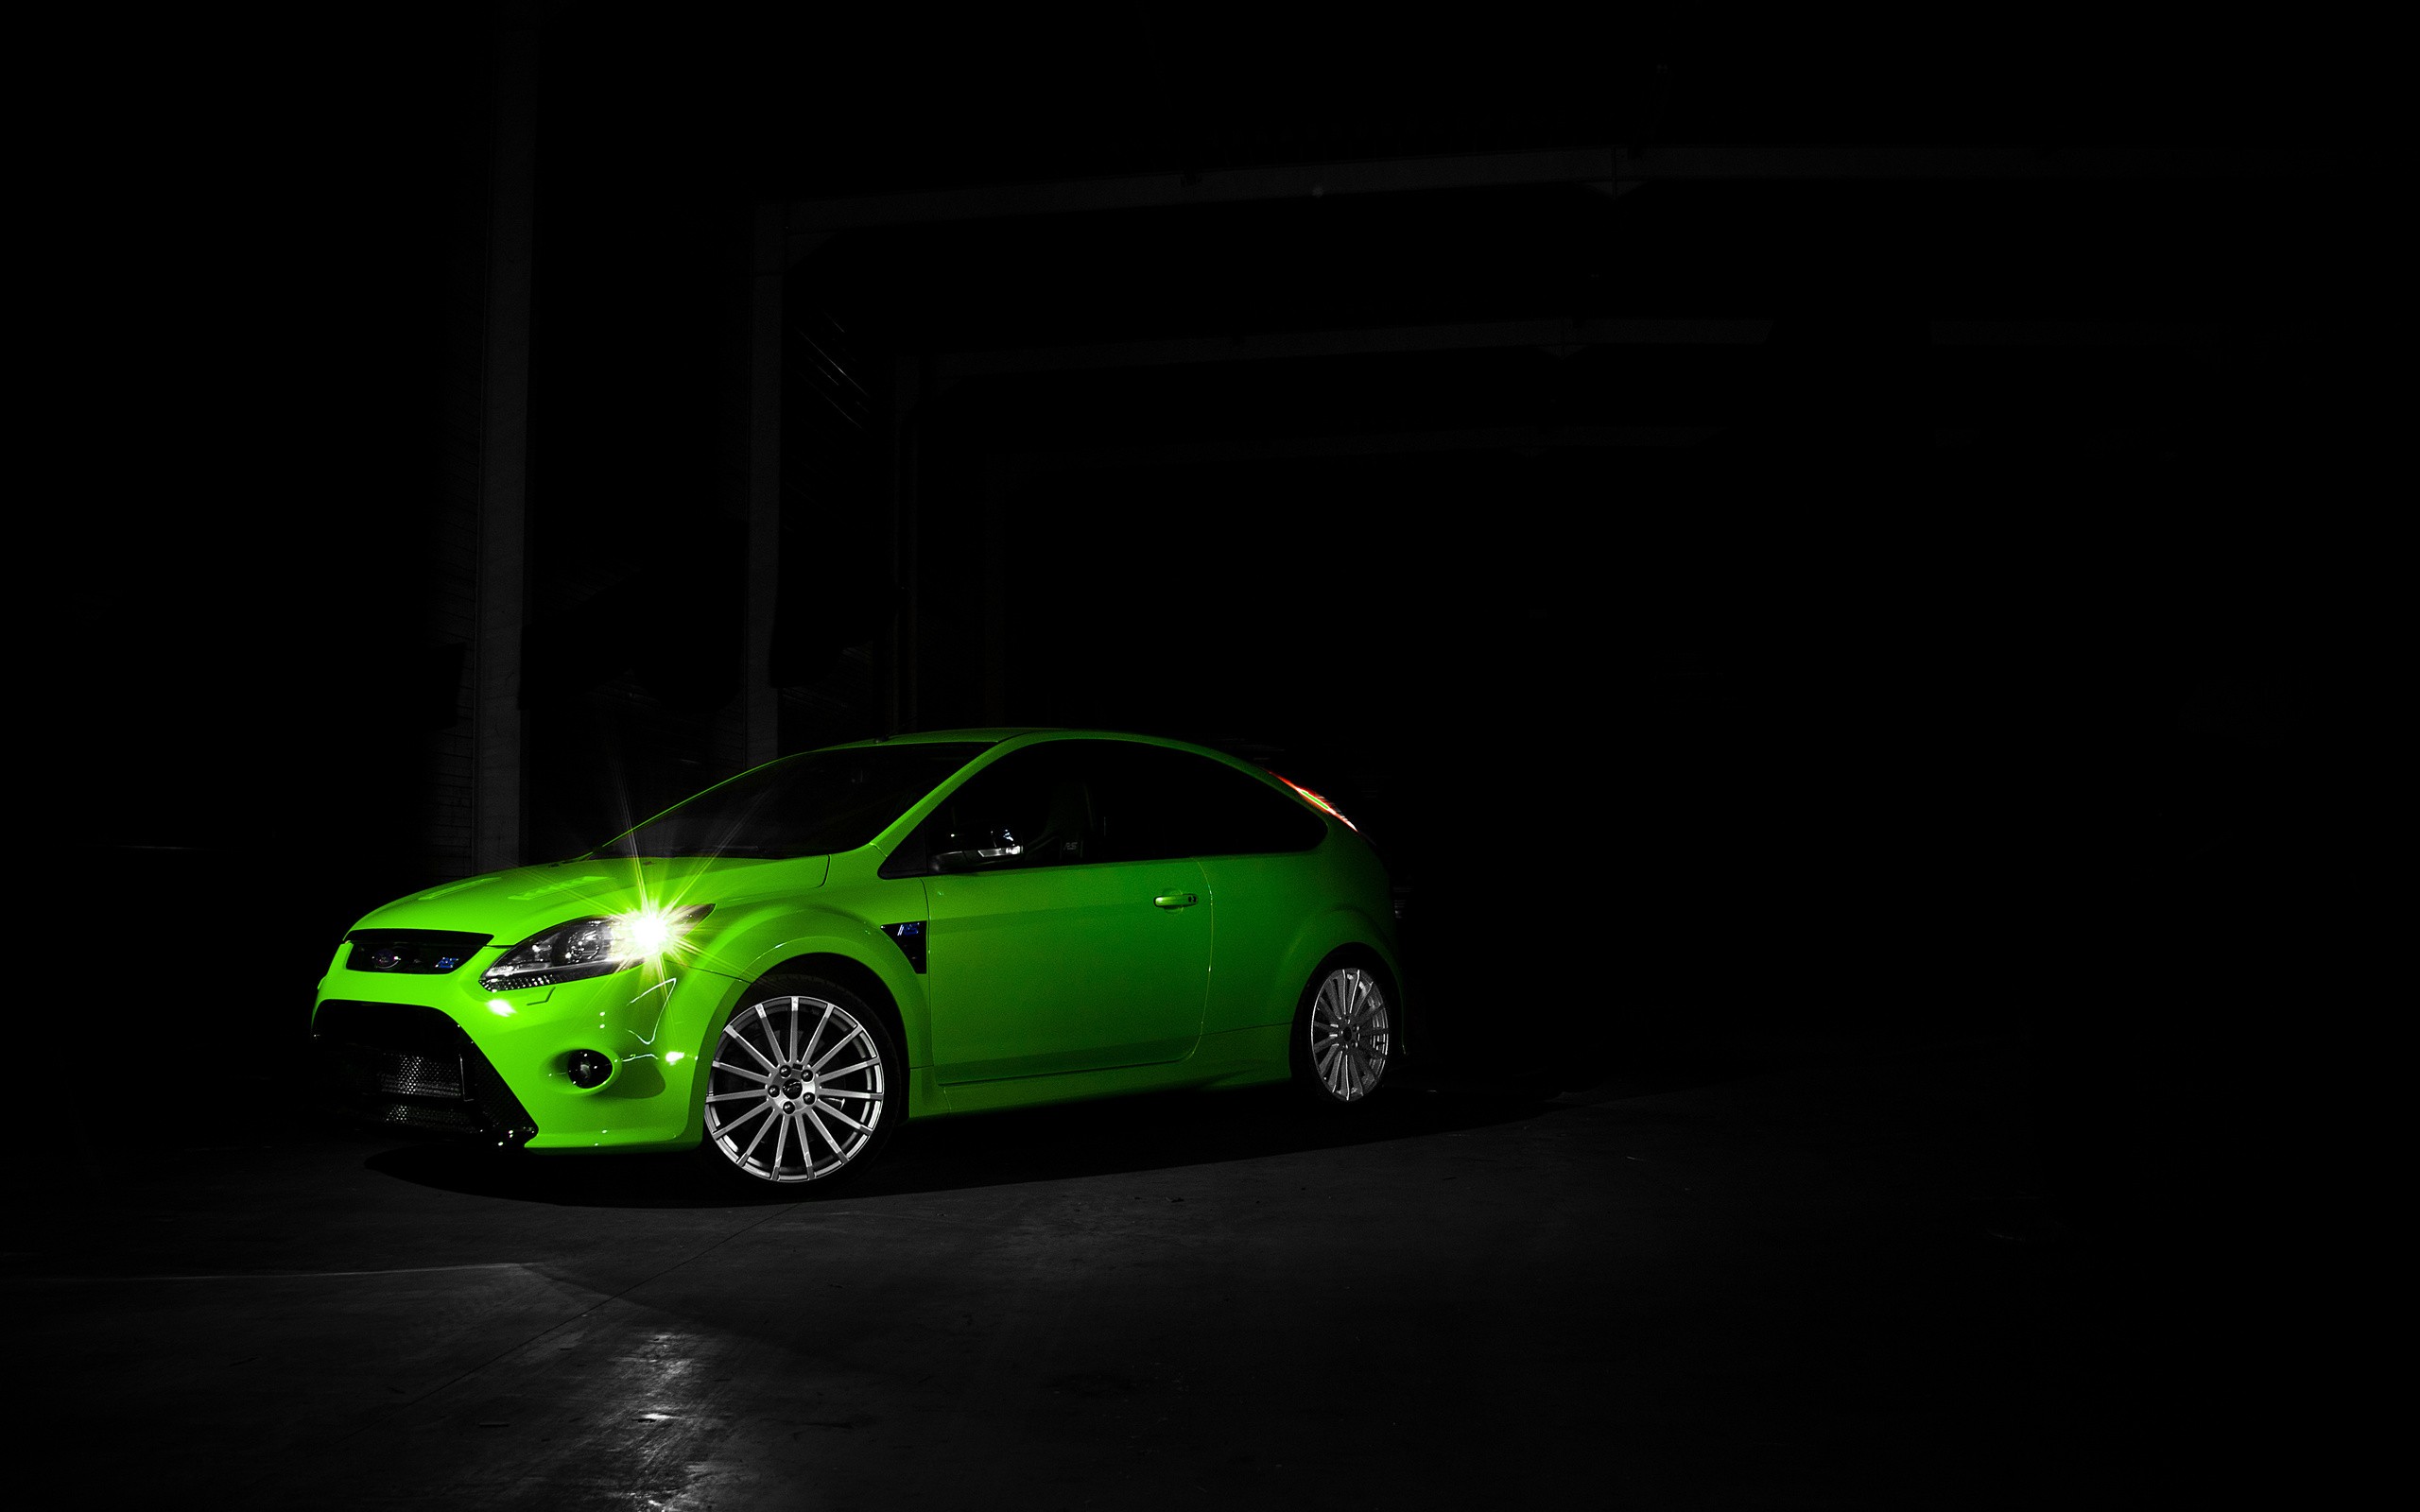 Wallpapers car Ford ford focus on the desktop